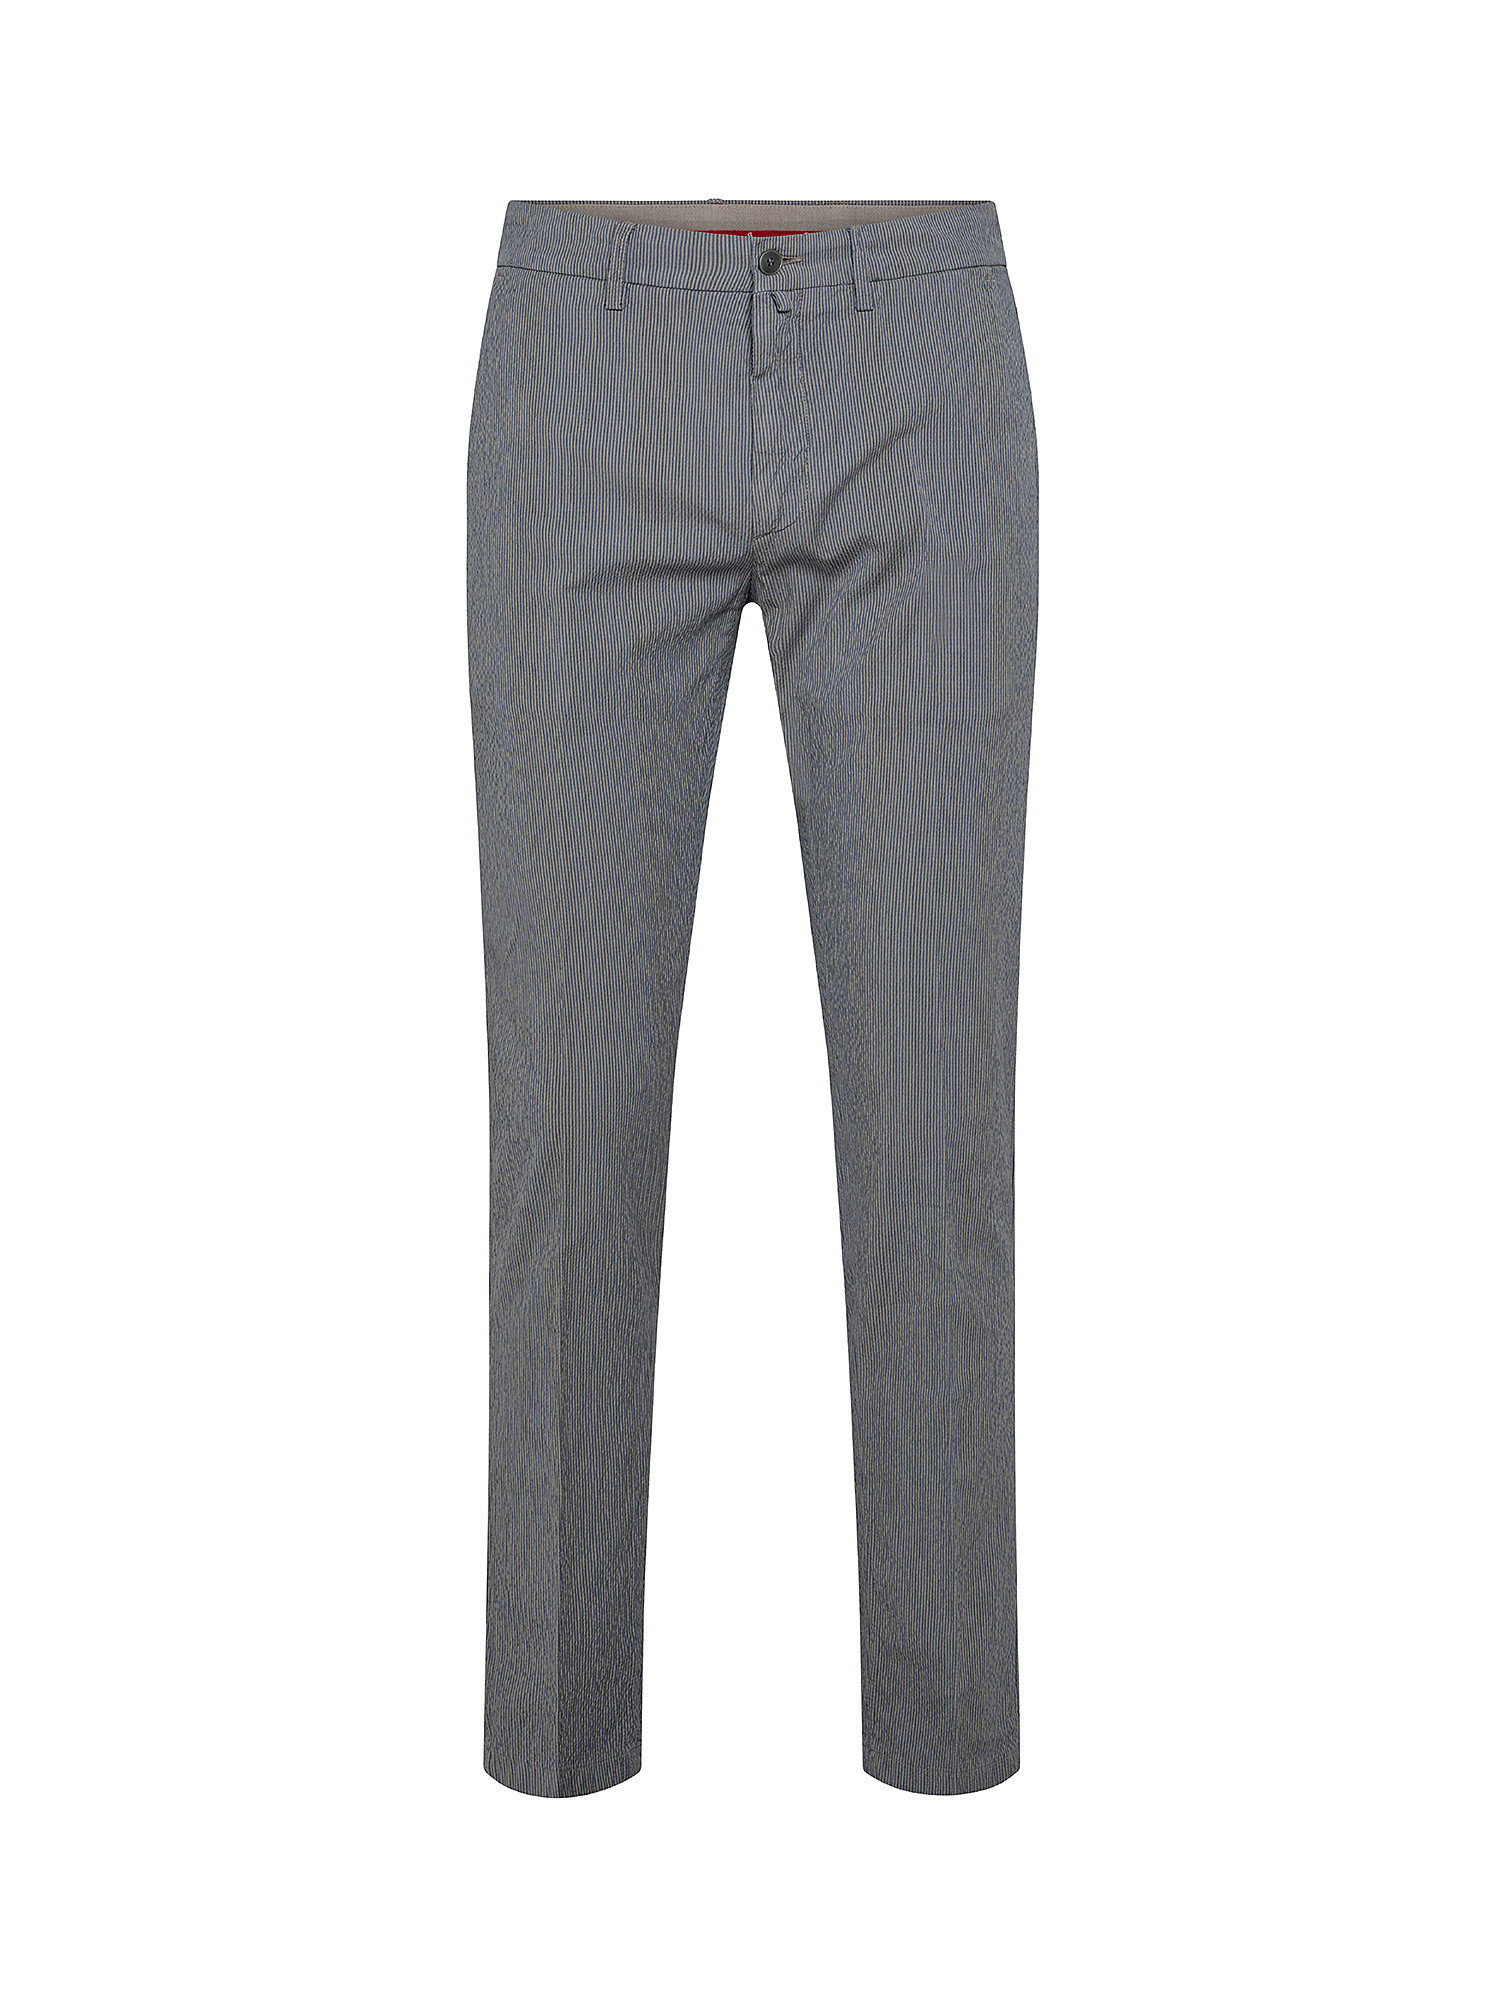 Chino trousers, Grey, large image number 0